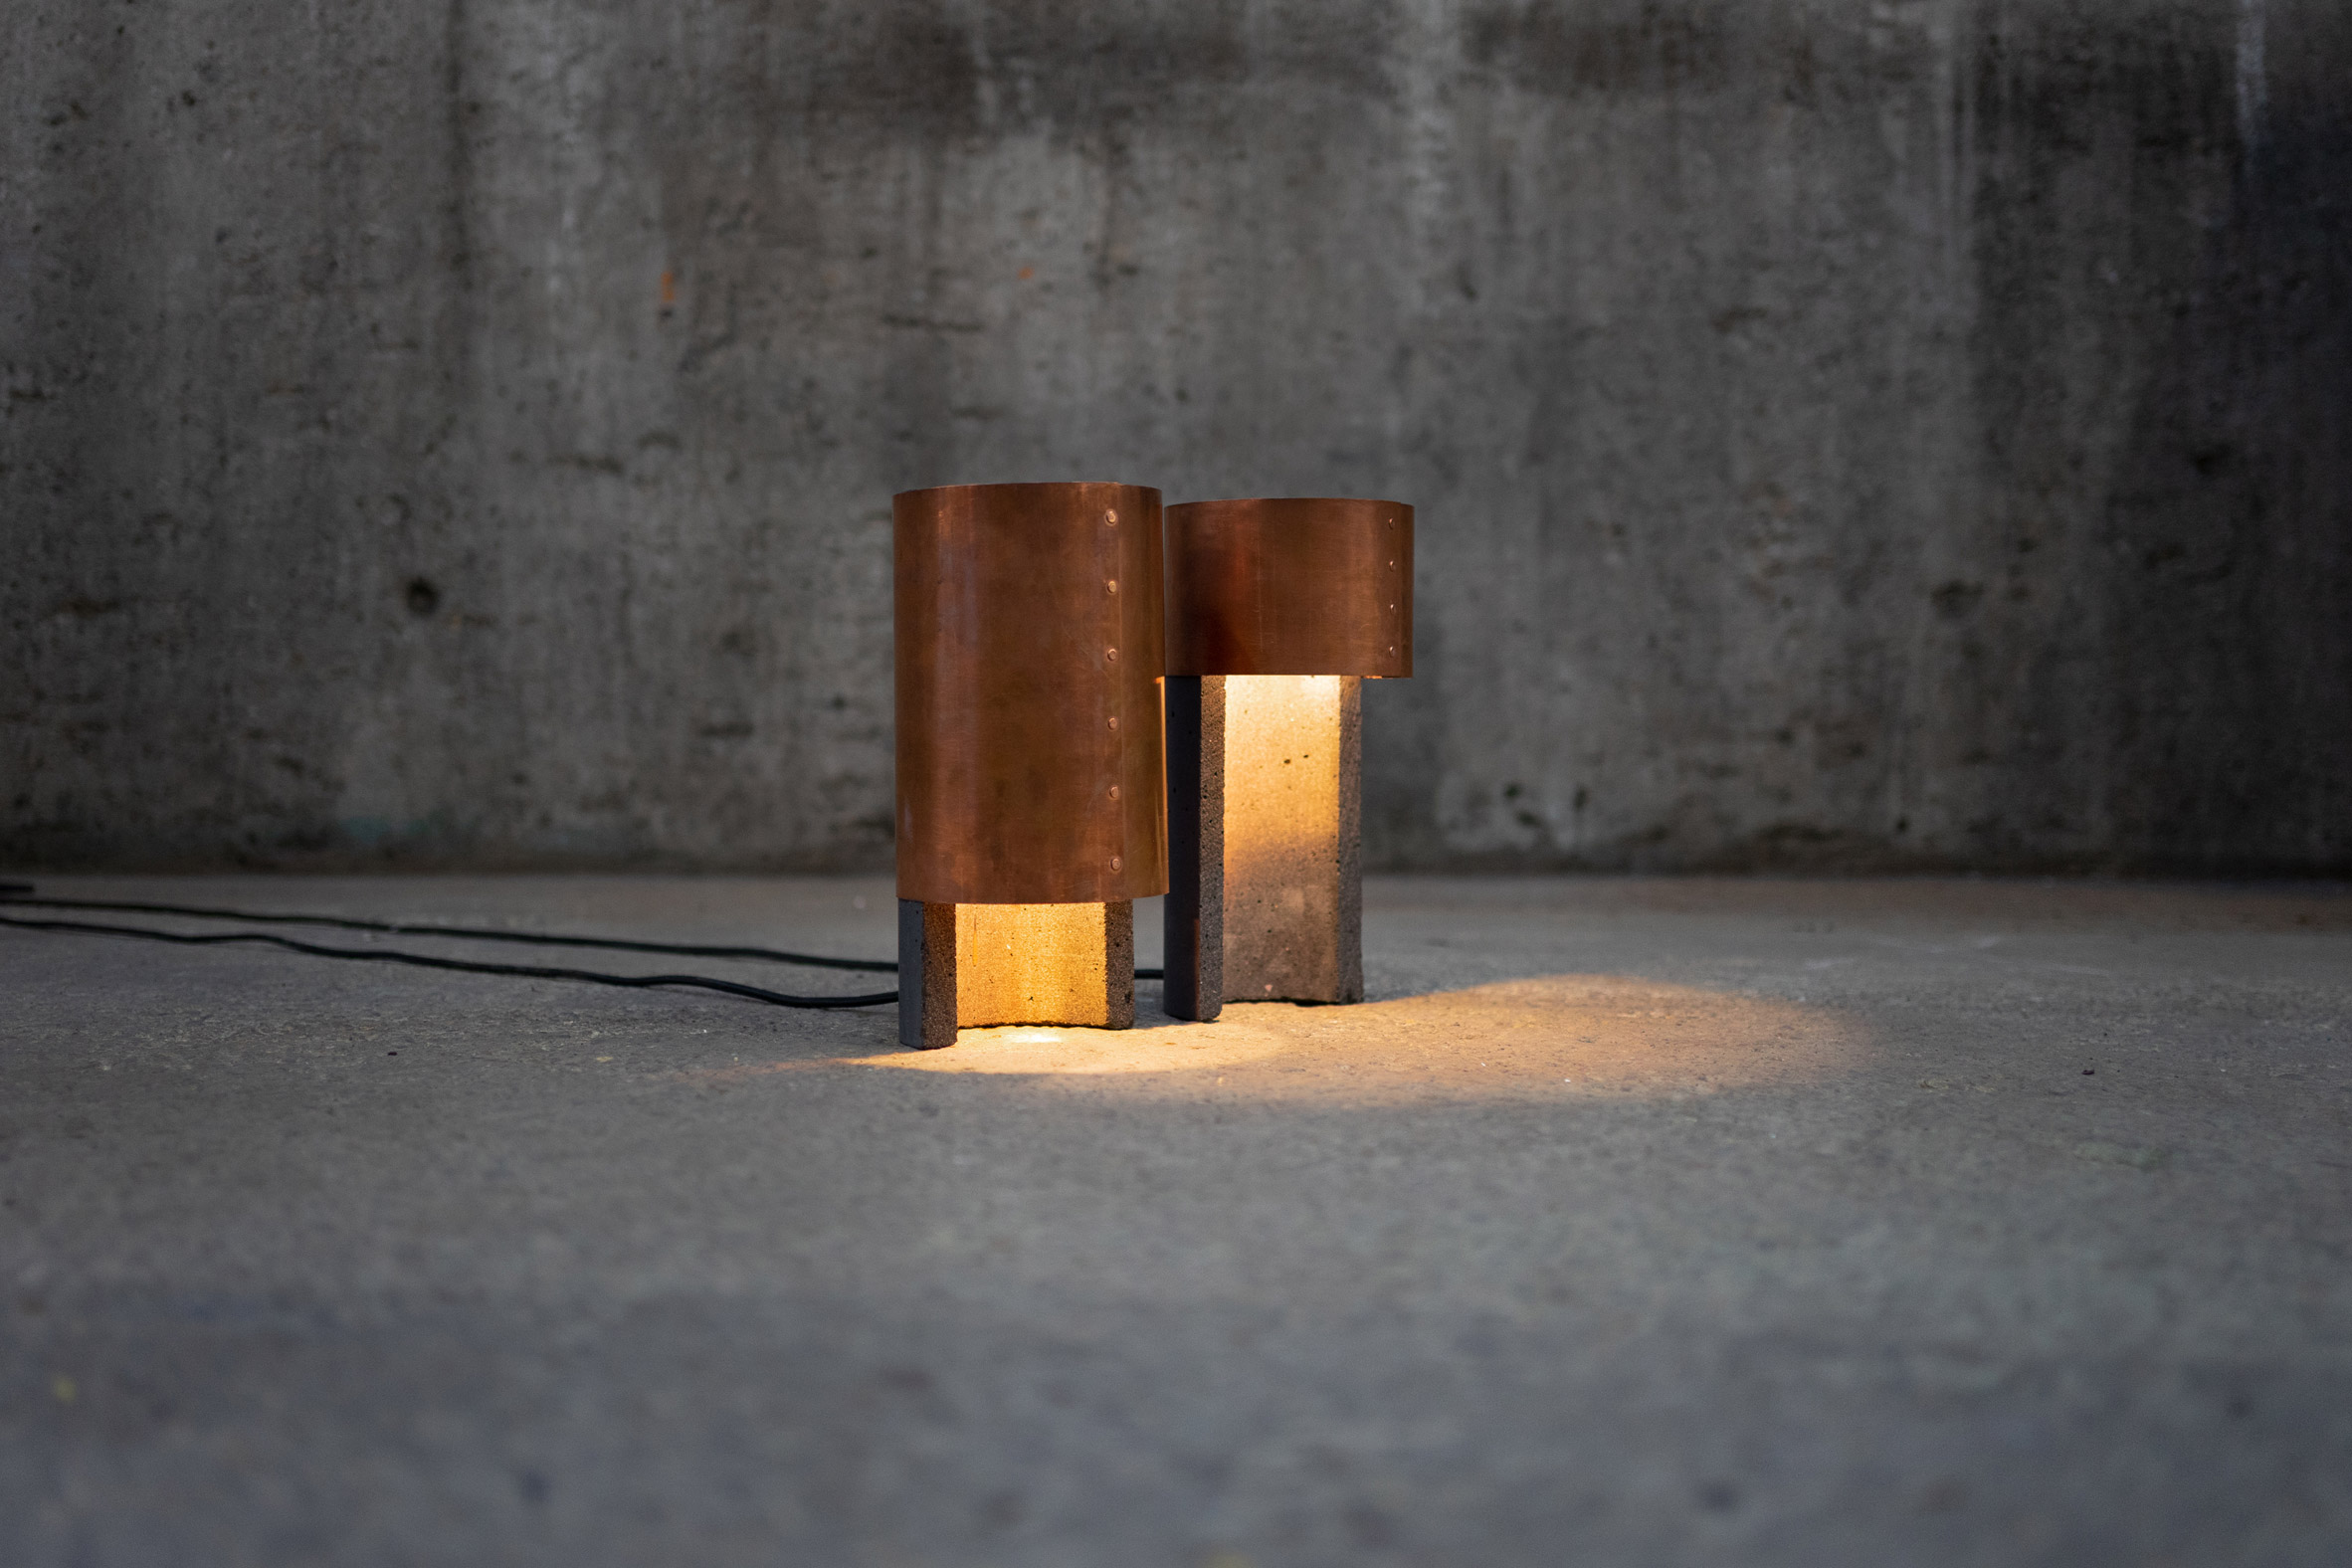 Studio ThusThat creates objects from "overlooked" byproducts of the copper industry